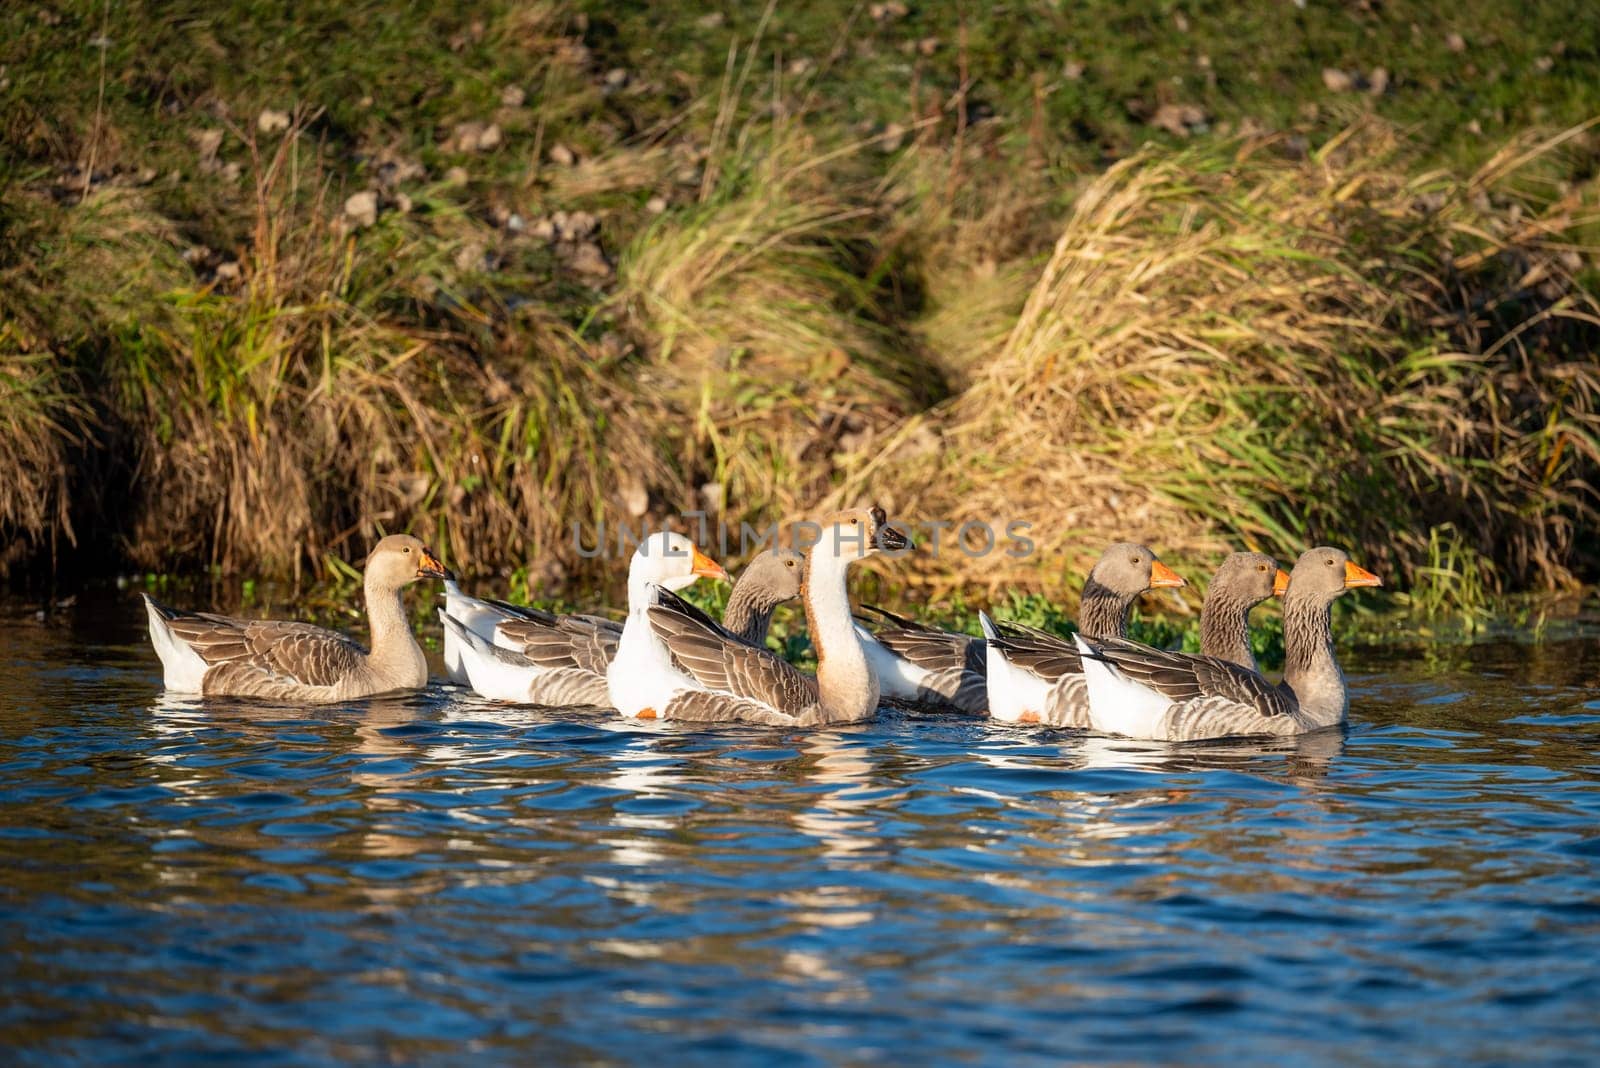 Gaggle of geese on the river by VitaliiPetrushenko